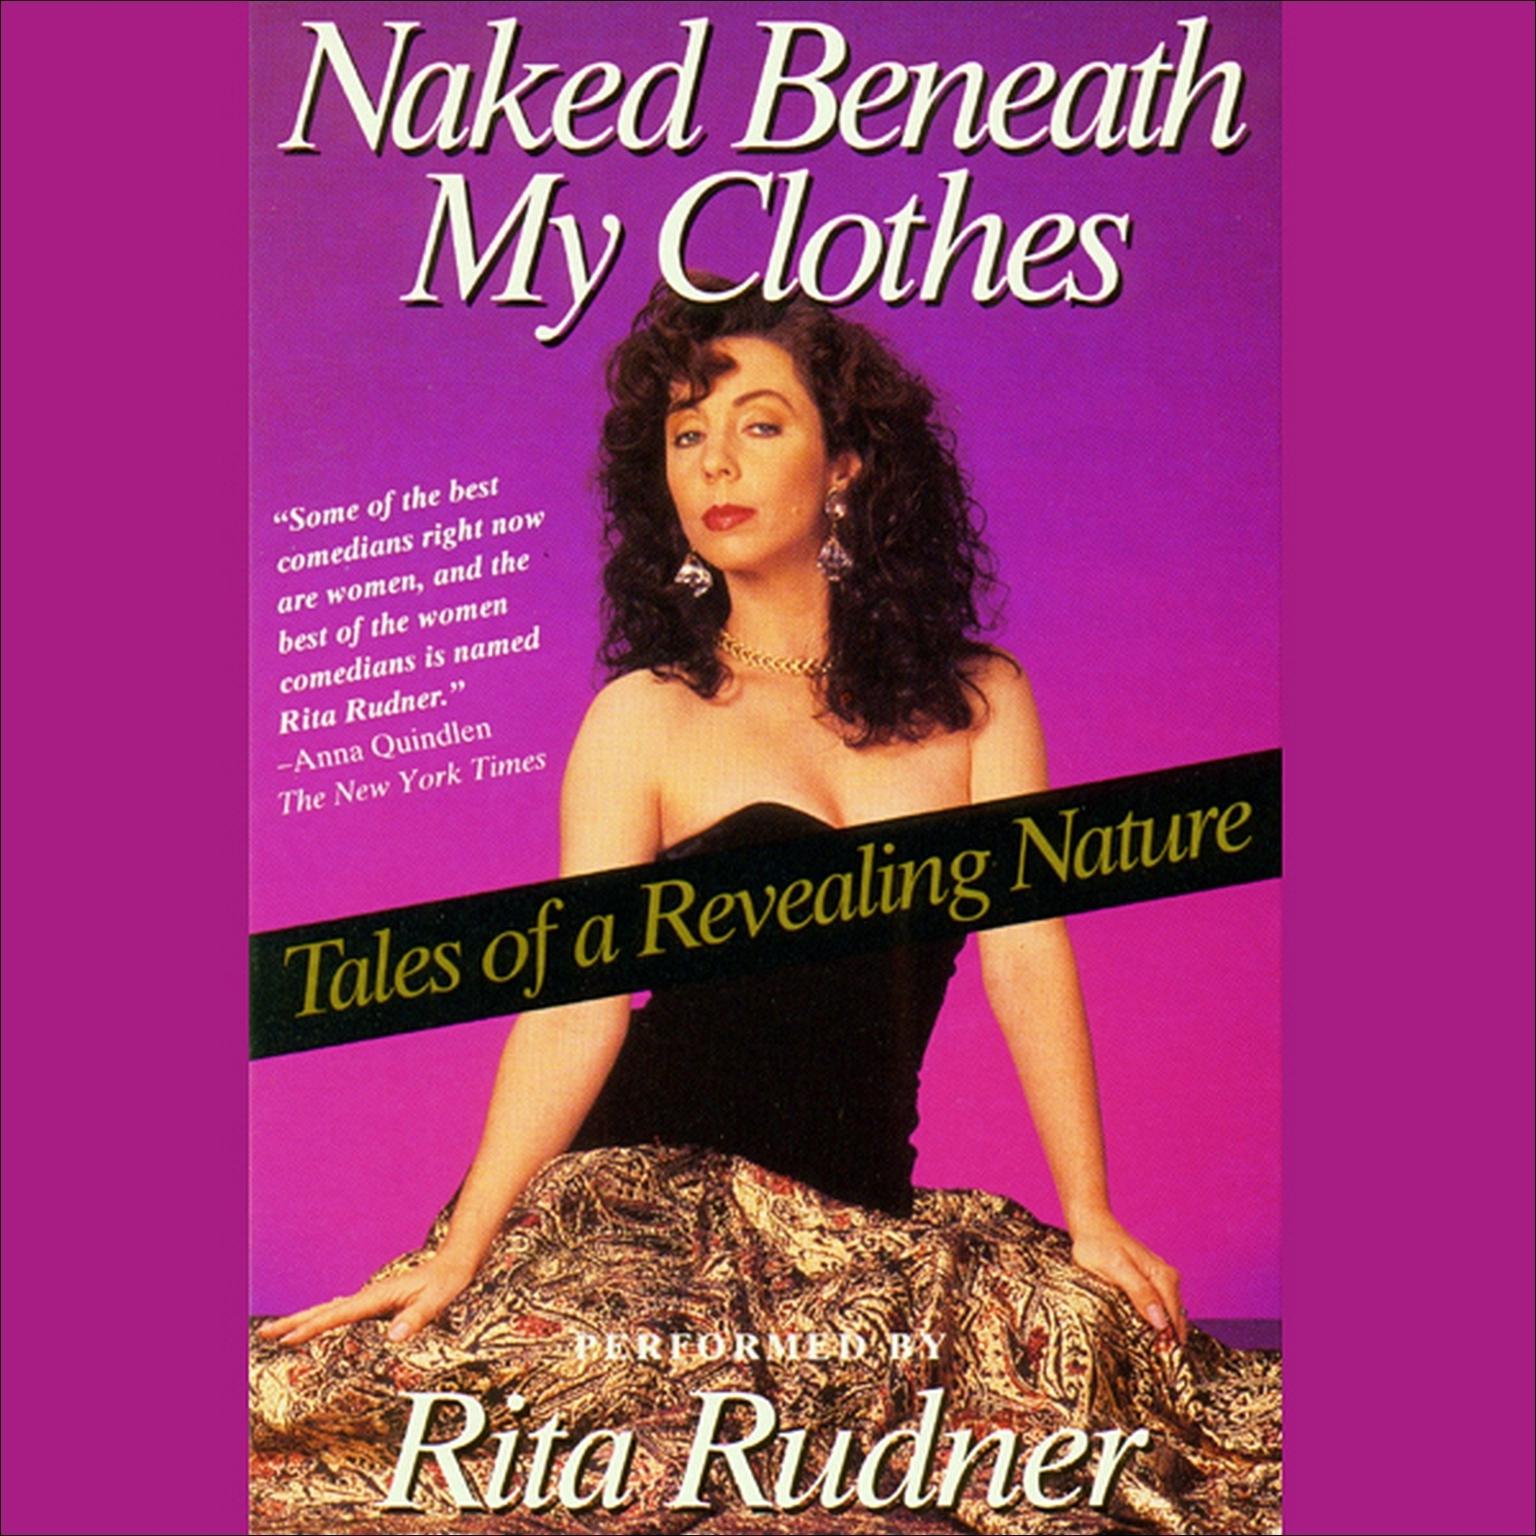 Naked Beneath My Clothes (Abridged): Tales of a Revealing Nature Audiobook, by Rita Rudner